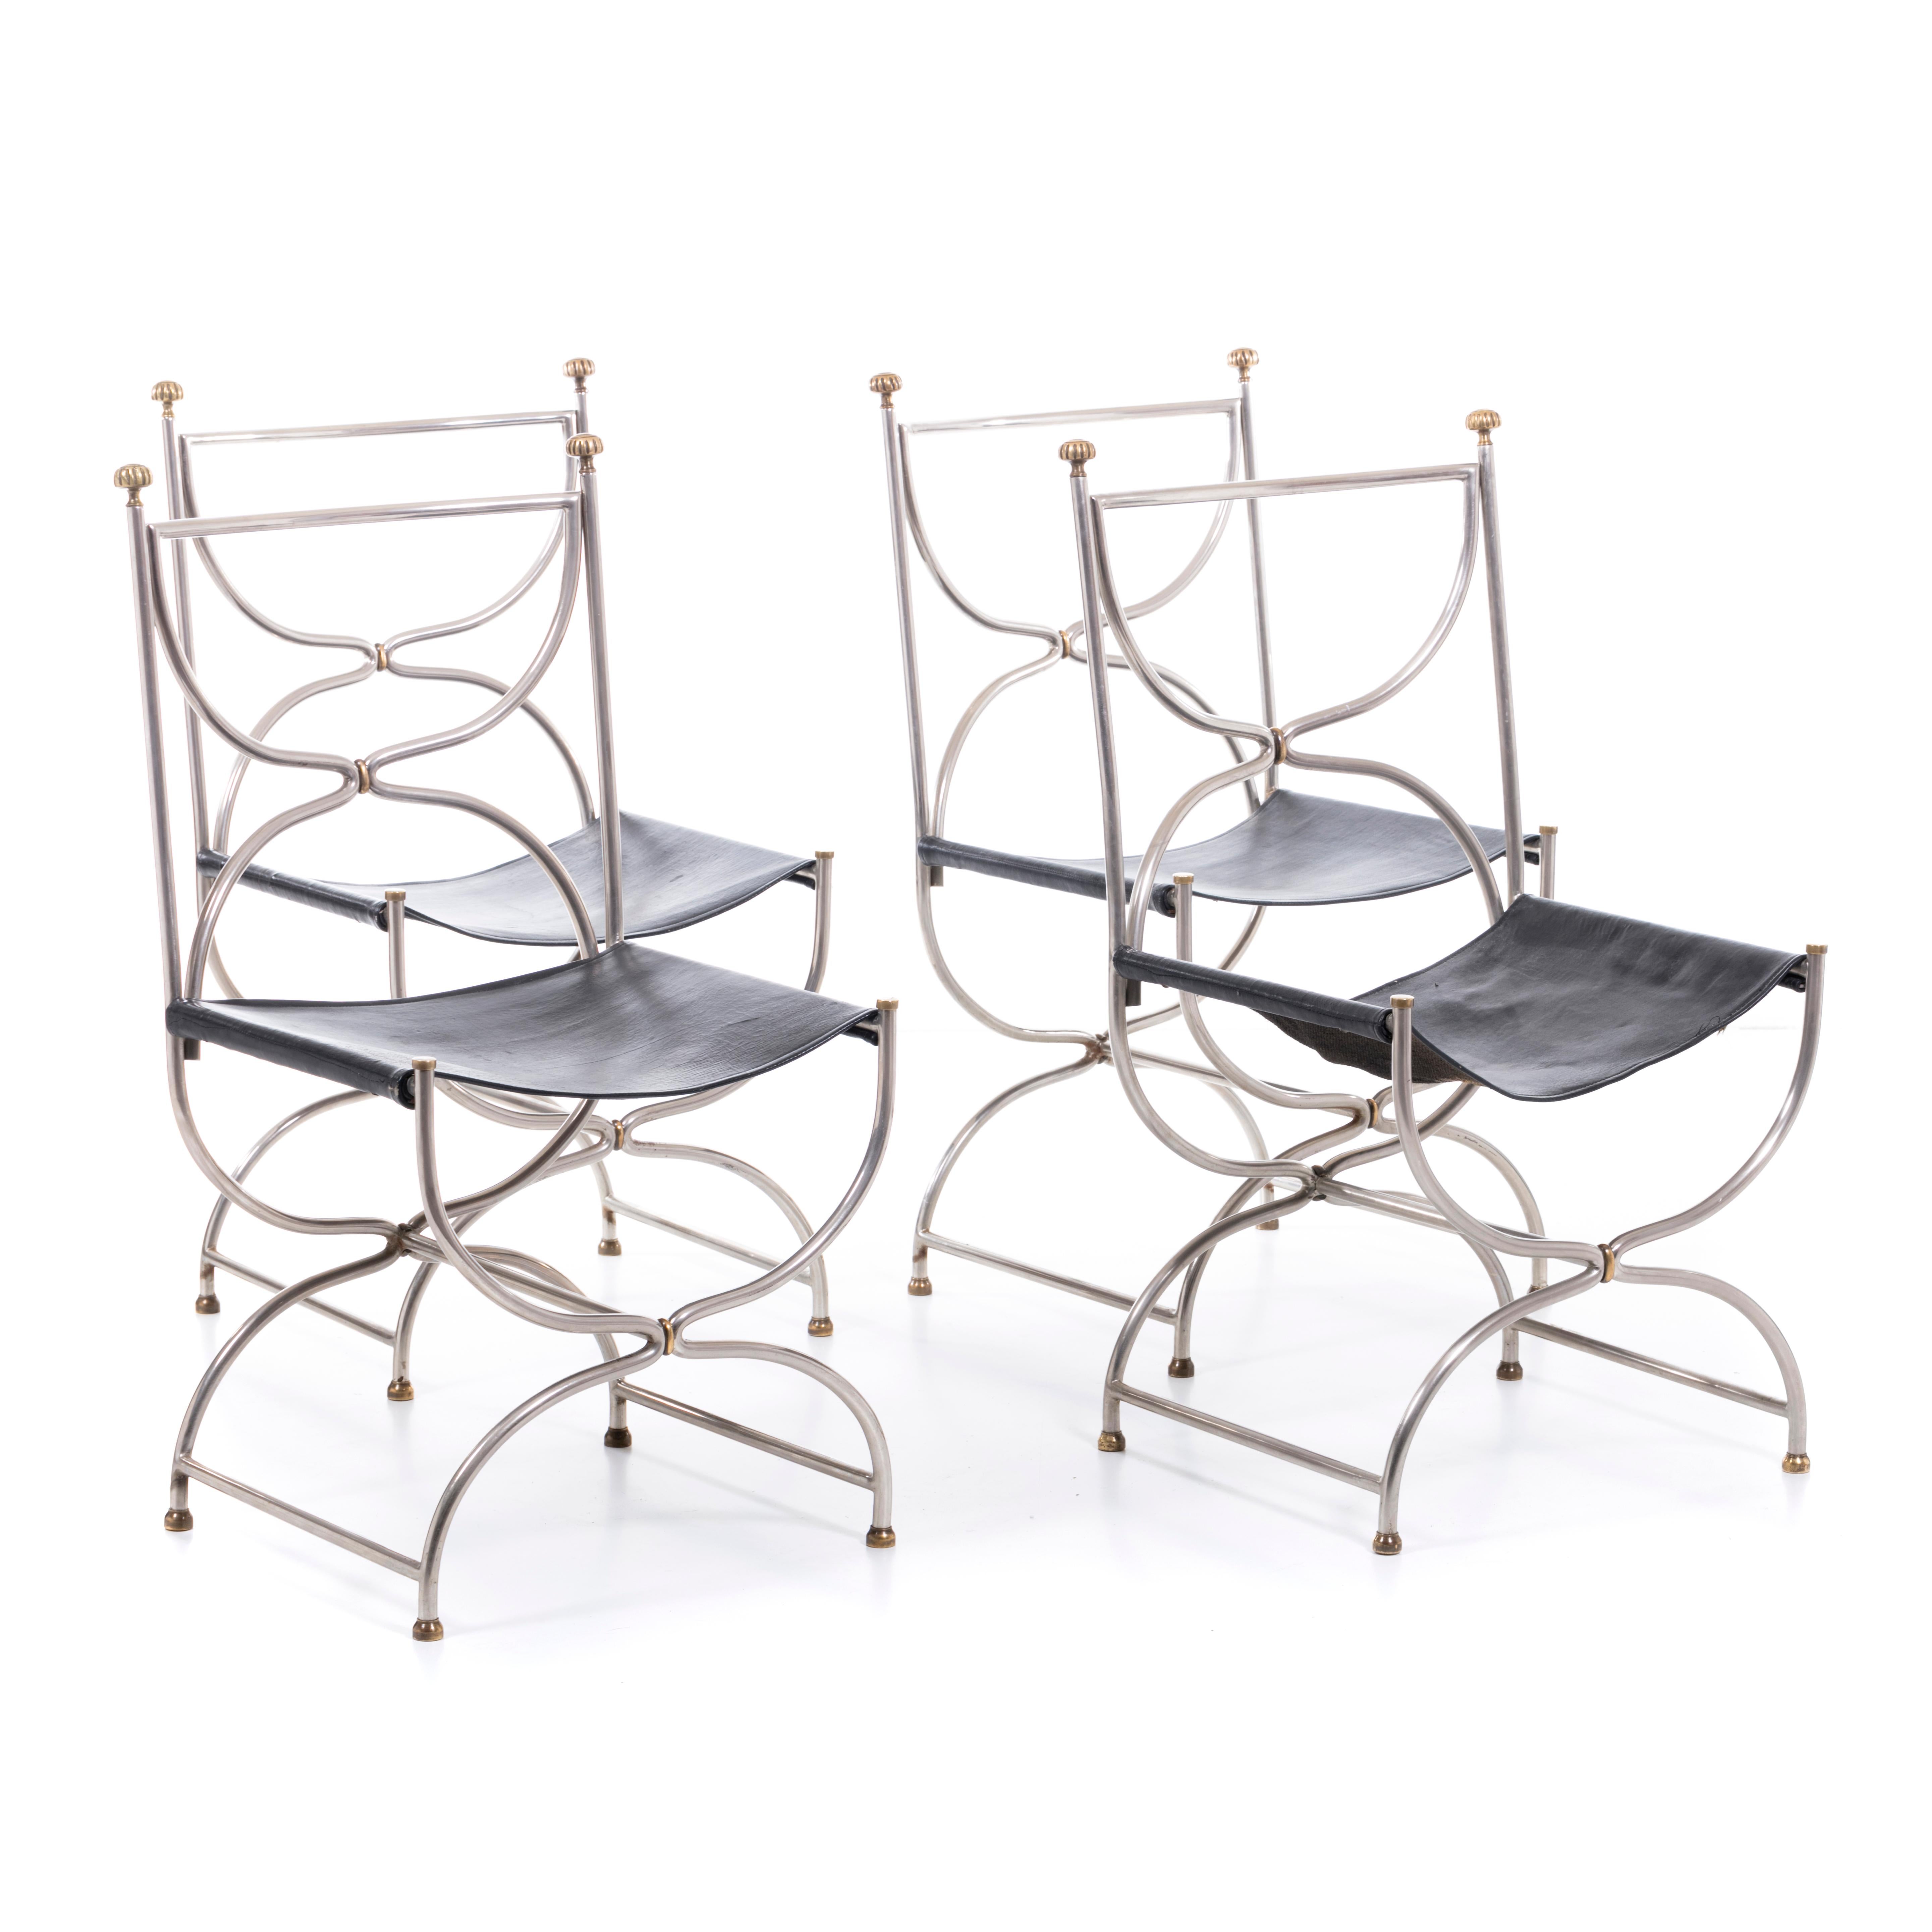 A Set of 4 elegant French 1960's Curule Savonarola chairs by Jansen, Made of steel and brass with original black leather seat showing beautiful patina, The minimal scultural structure contrasting nicely with the organic leather seat.